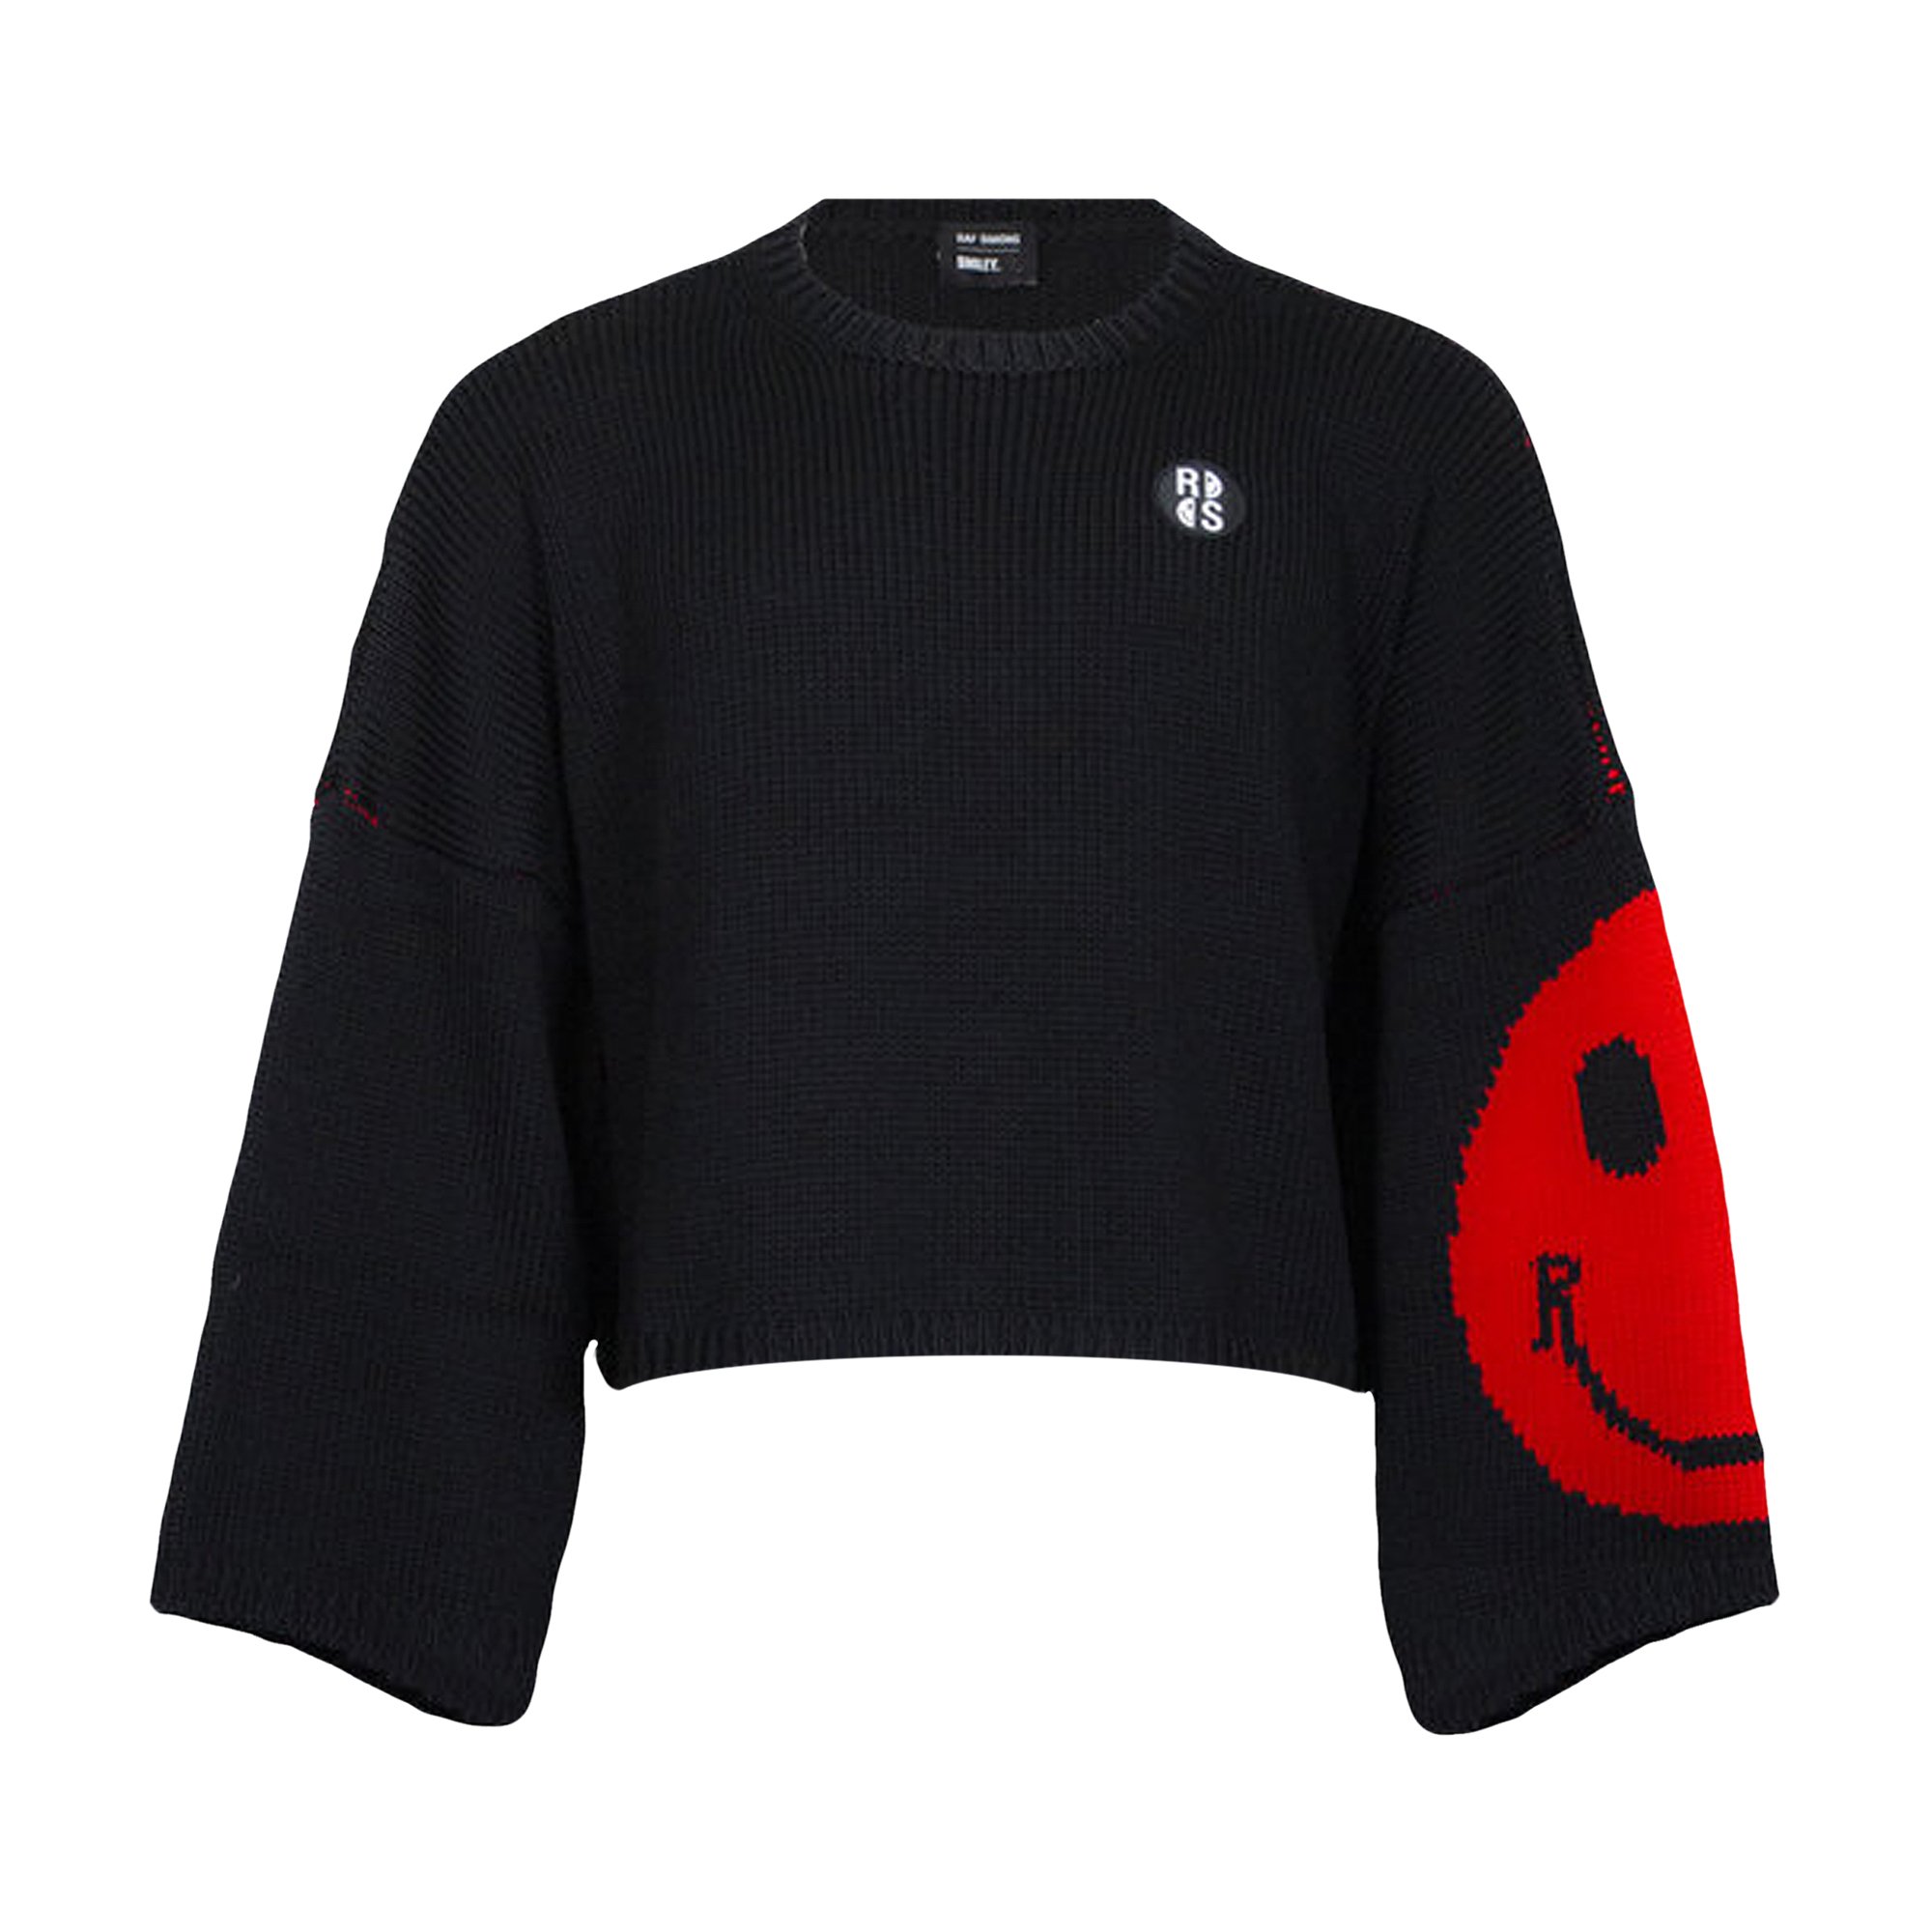 Buy Raf Simons RS Knit Sweater With Smiley 'Black' - 224 849 0099 